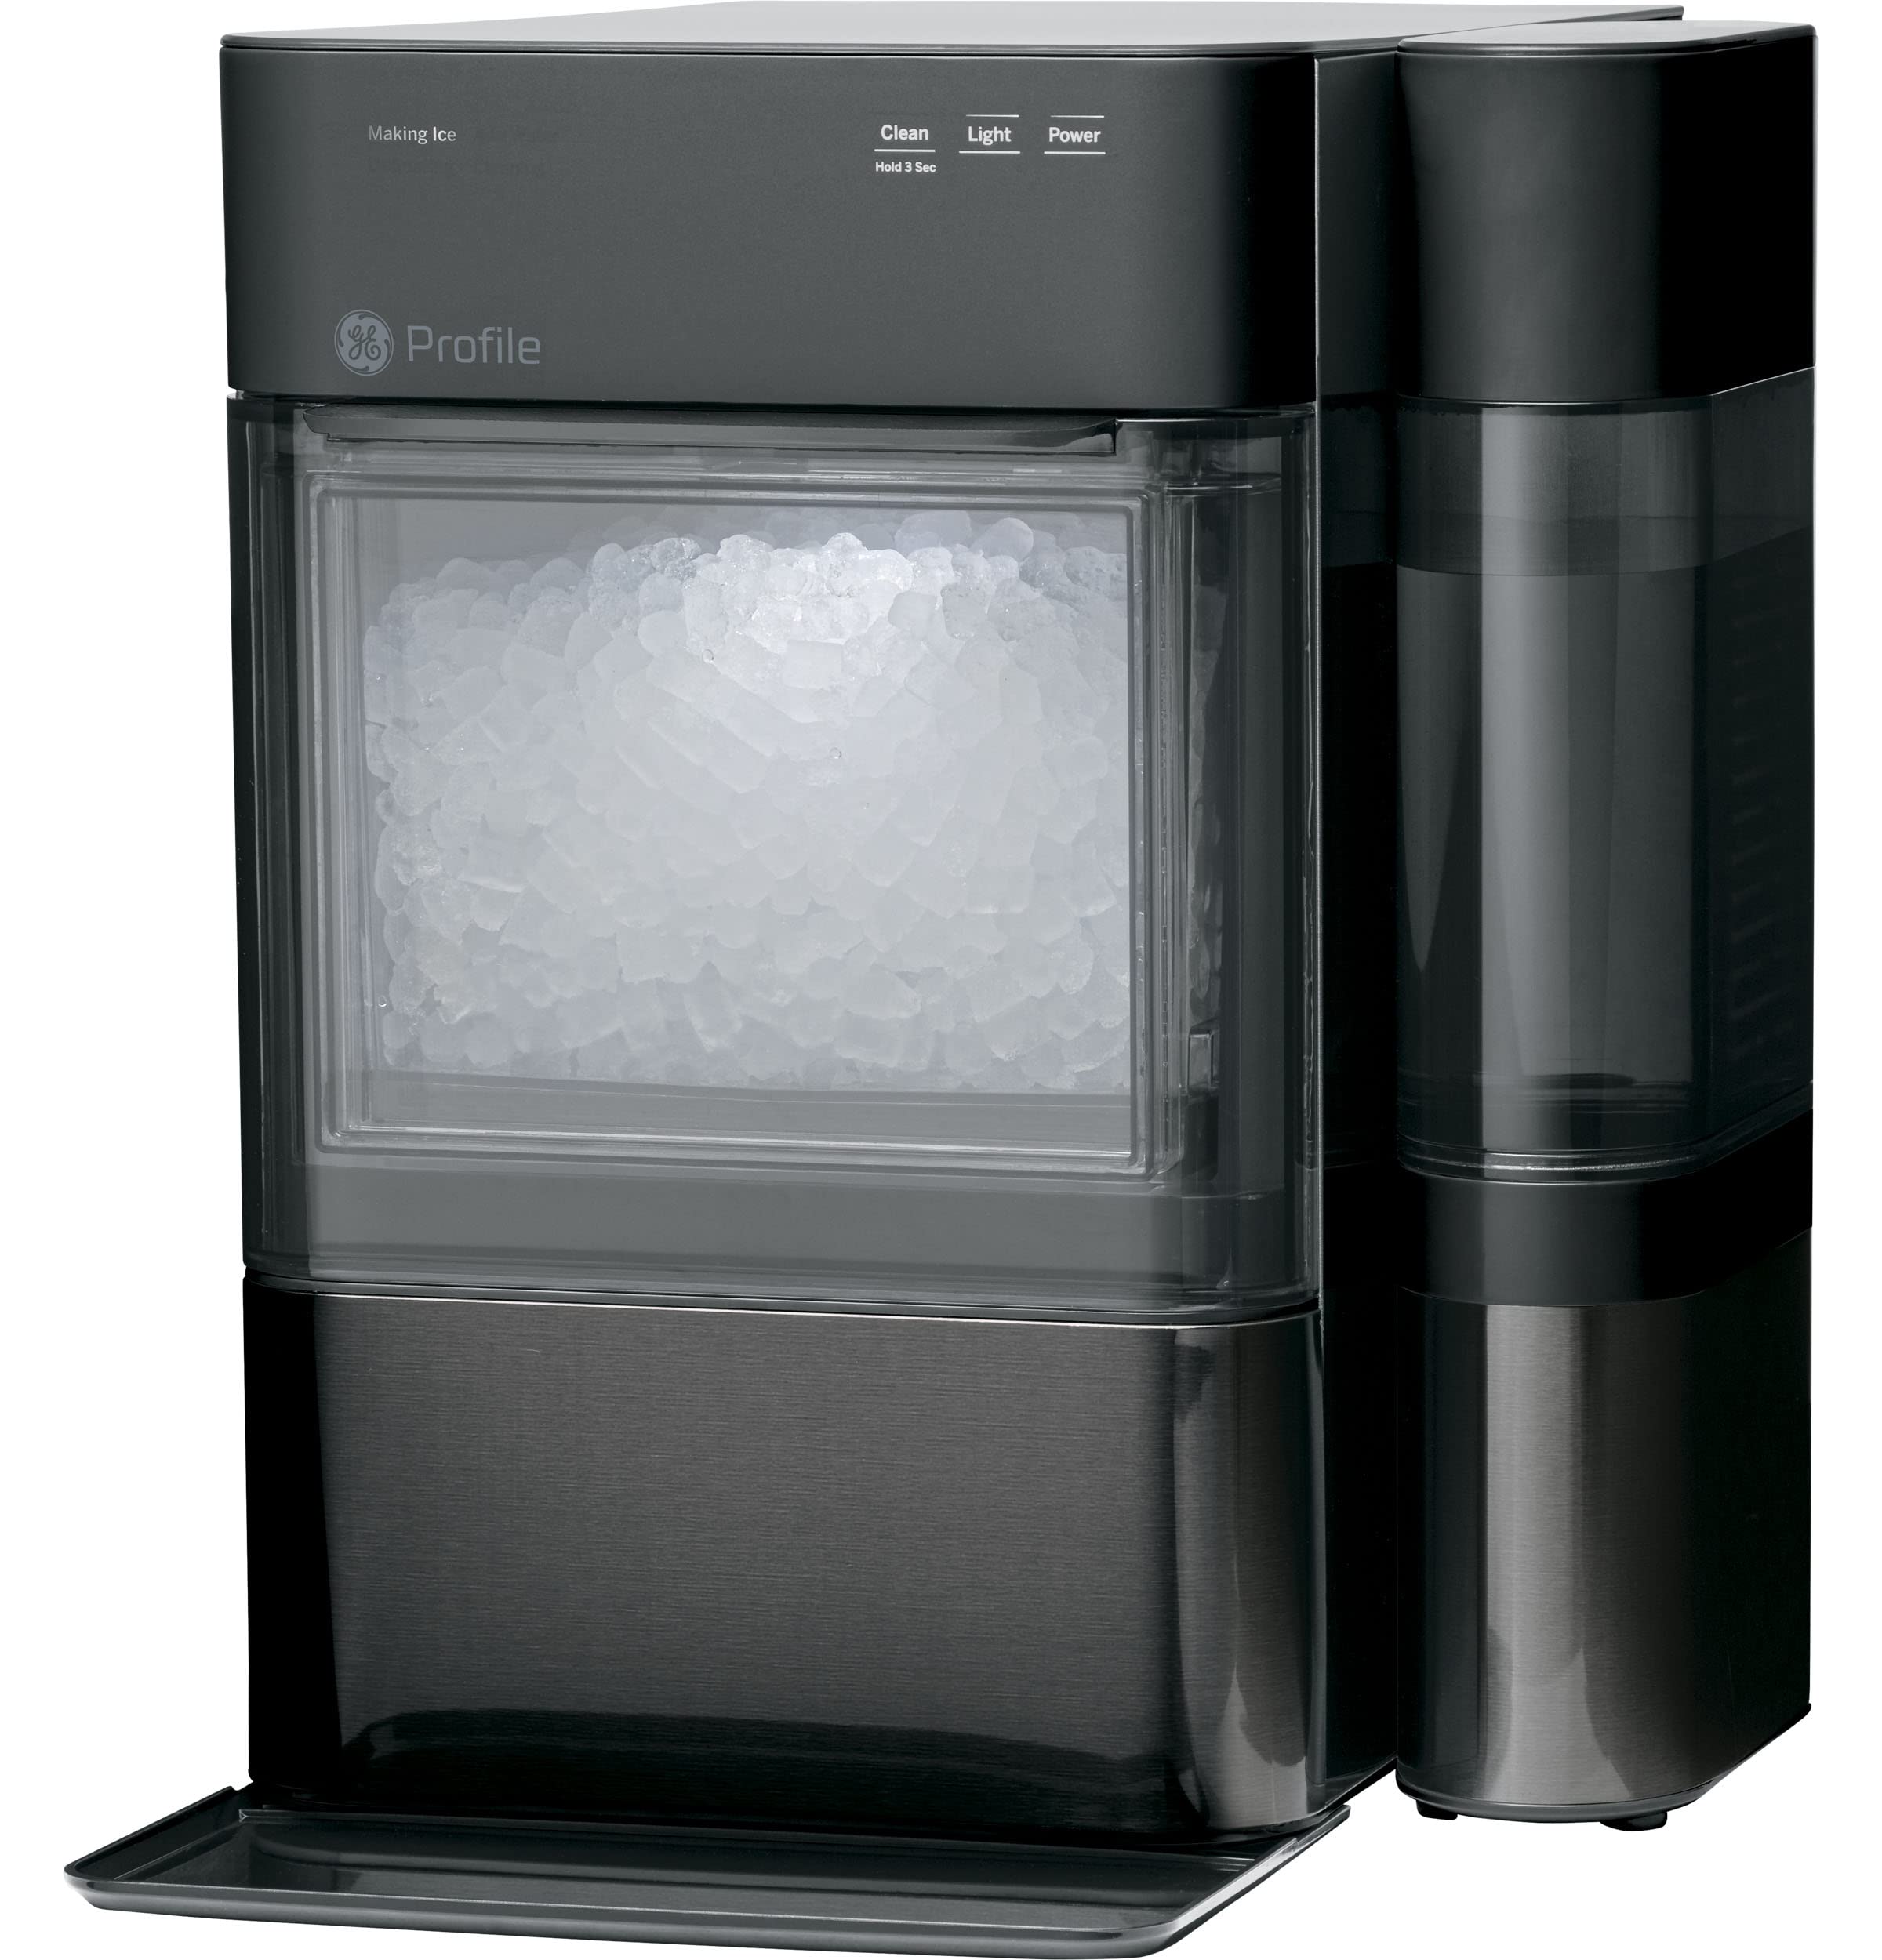 GE Profile Opal 2.0 | Countertop Nugt Ice Maker with Side Tank | Ice Machine with WiFi Connectivity | Smart Home Kitchen Essentials | Black Stainless